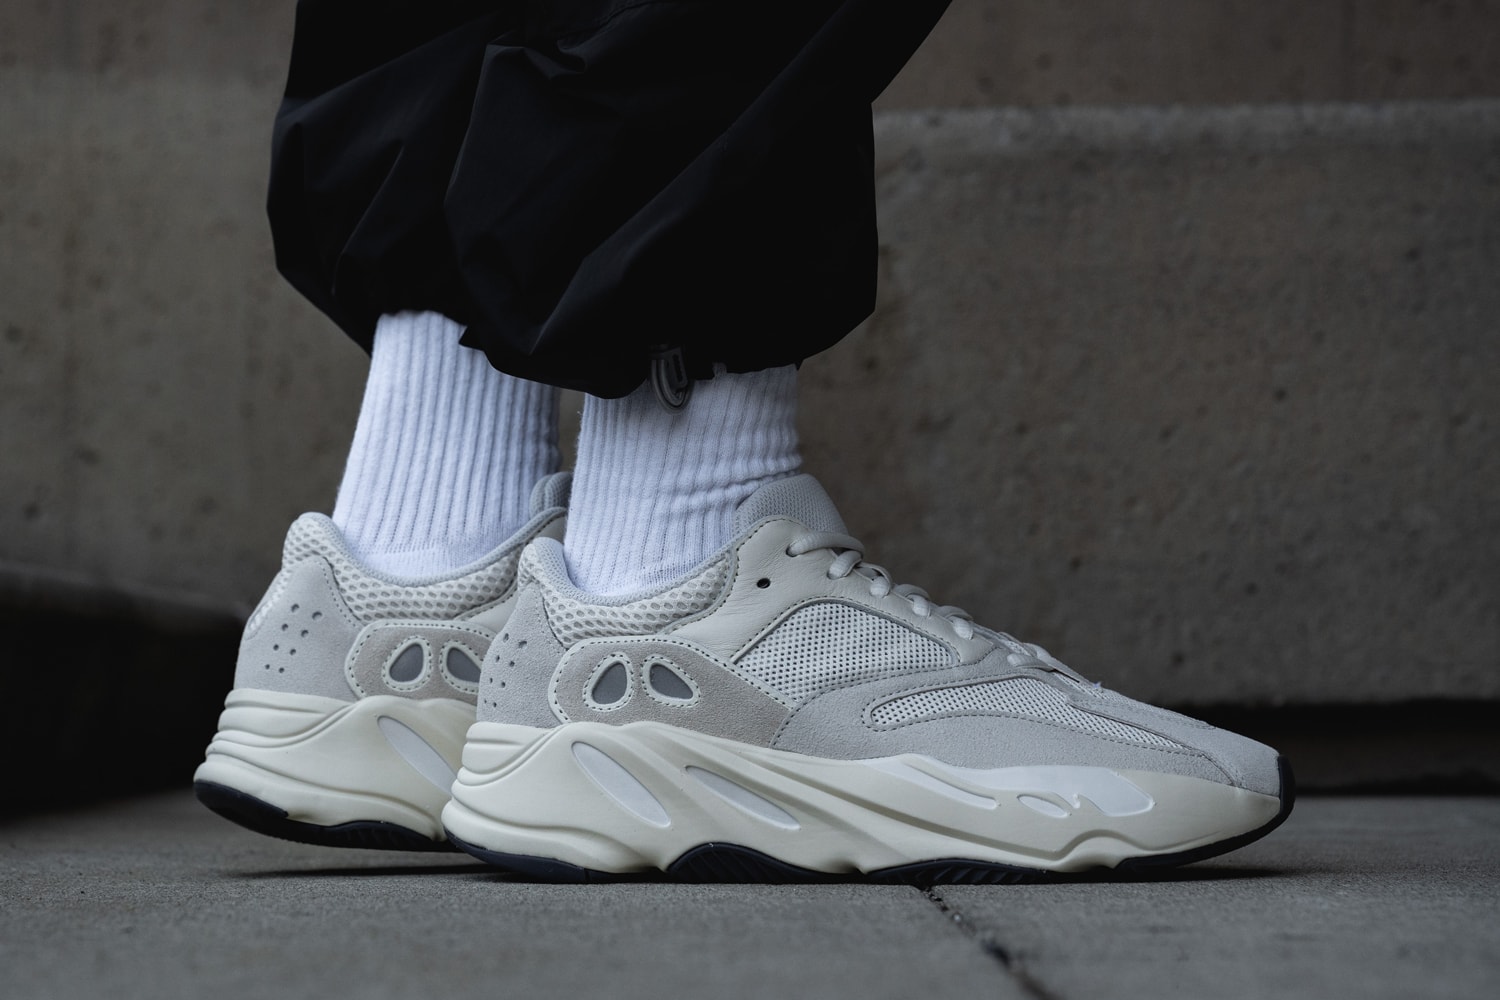 adidas YEEZY BOOST 700 Analog On-Foot Look Kanye West White Grey Sail Release info Date